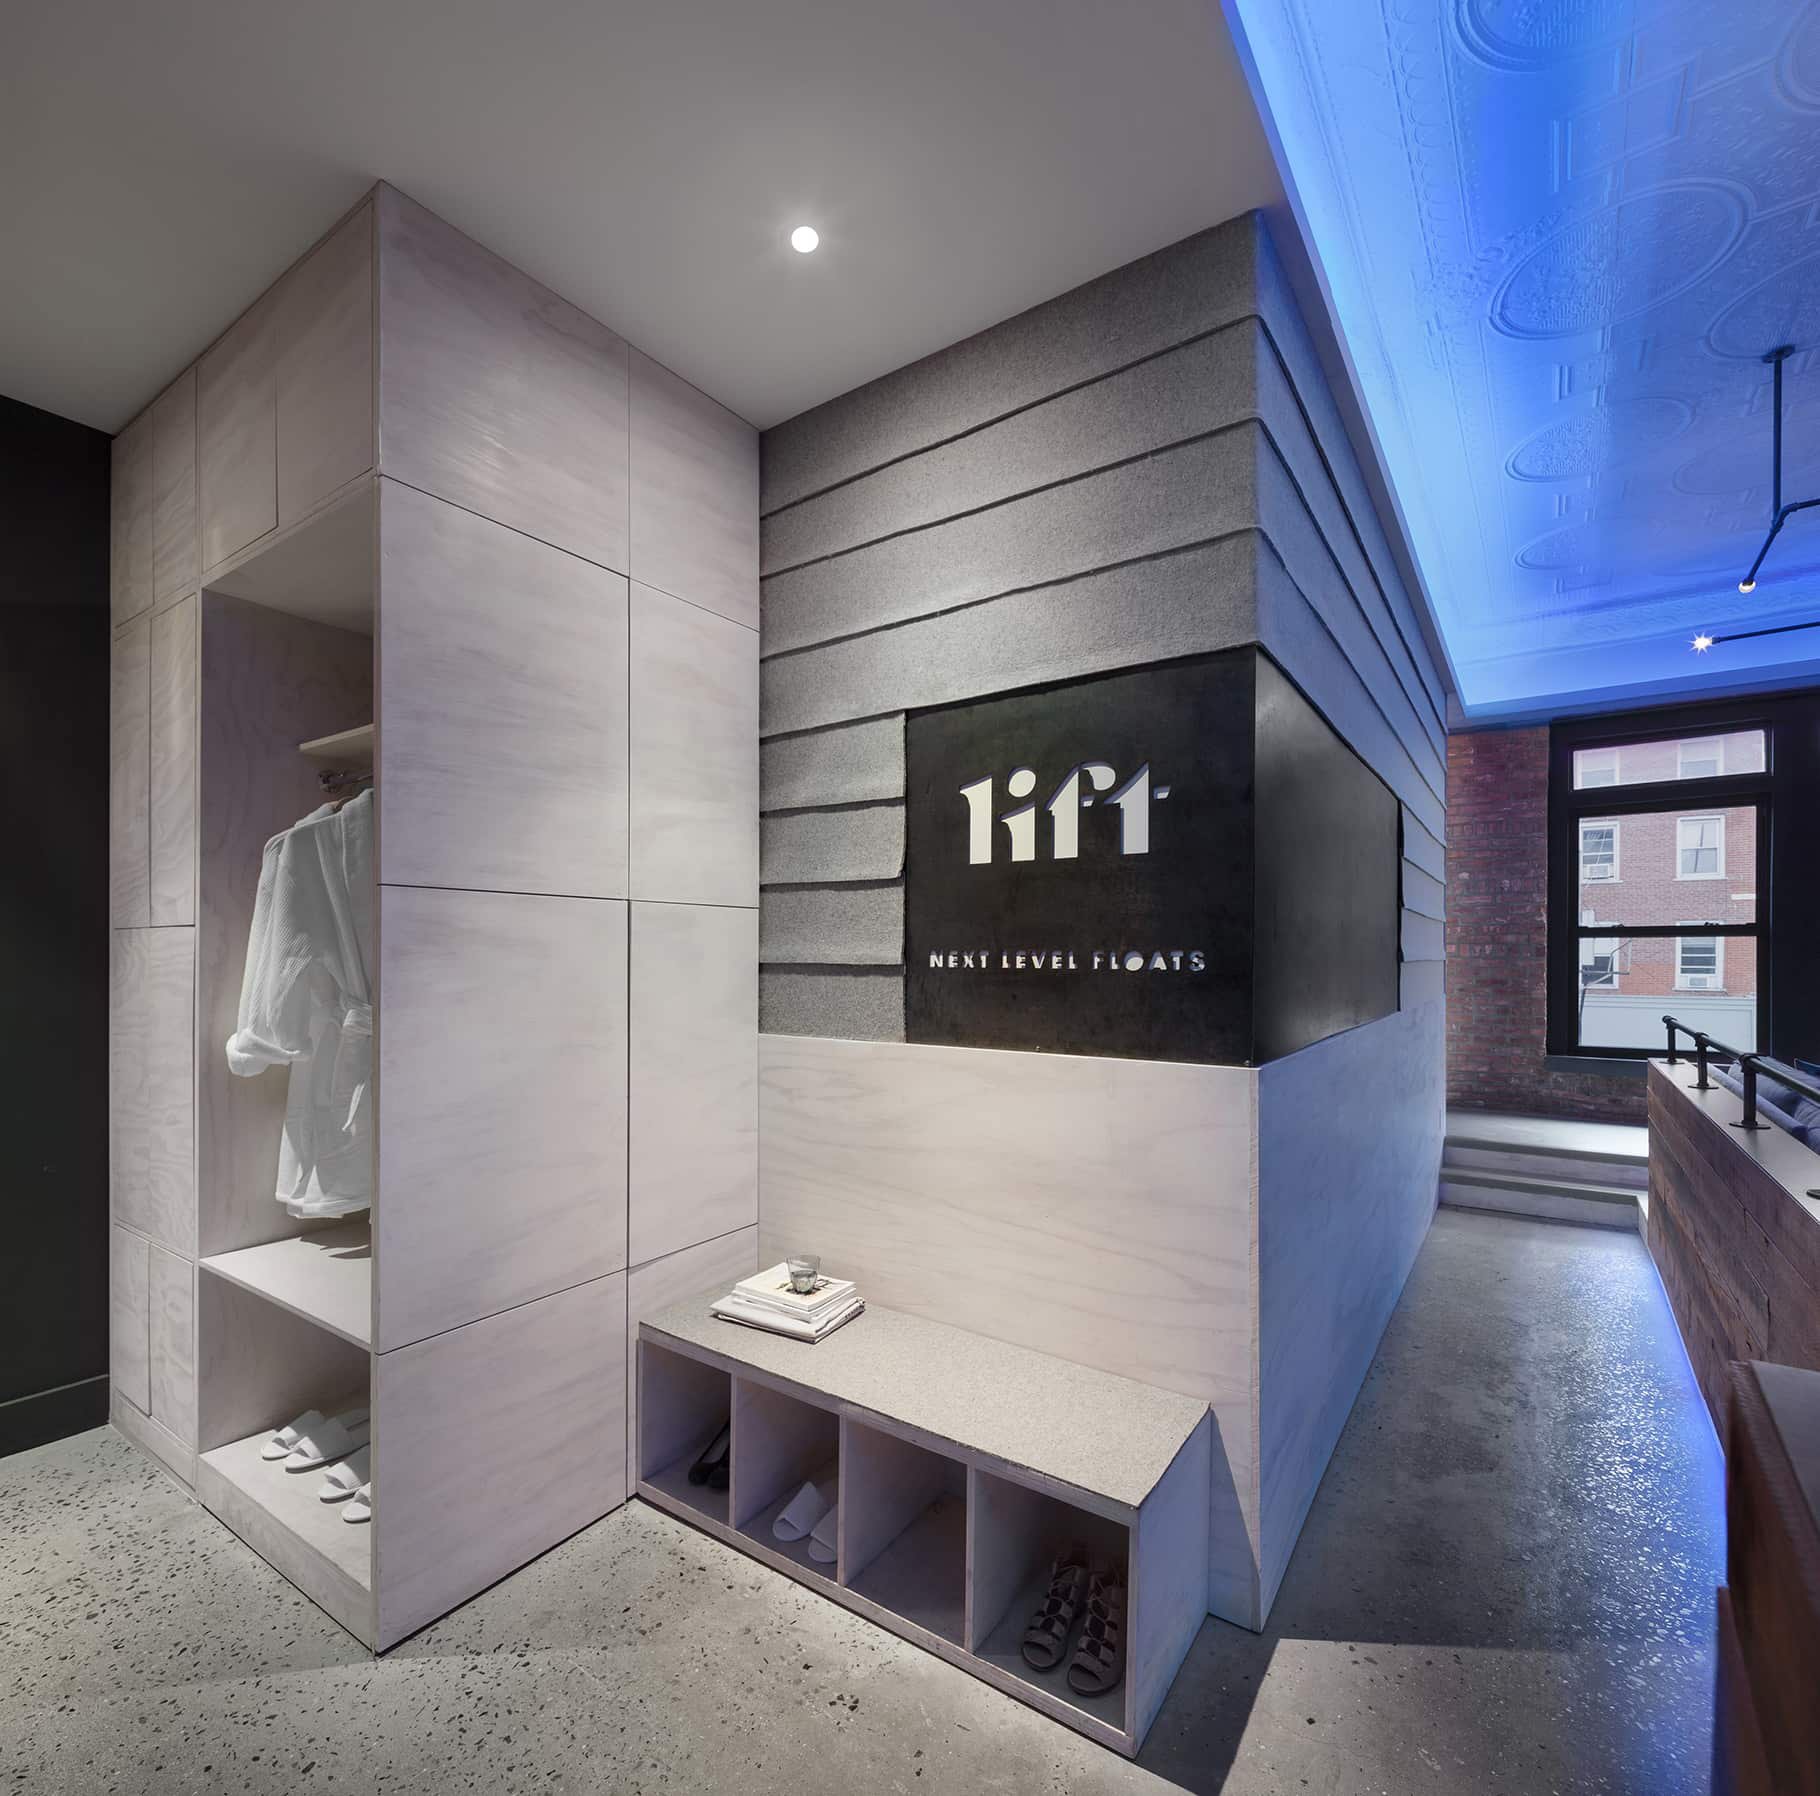 NYC Architect Architecture Modern Wellness Design Float Spa Commercial Renovate Renovation Flotation Therapy Exposed Brick Blue Light Tin Ceiling Reclaimed Timber Branding